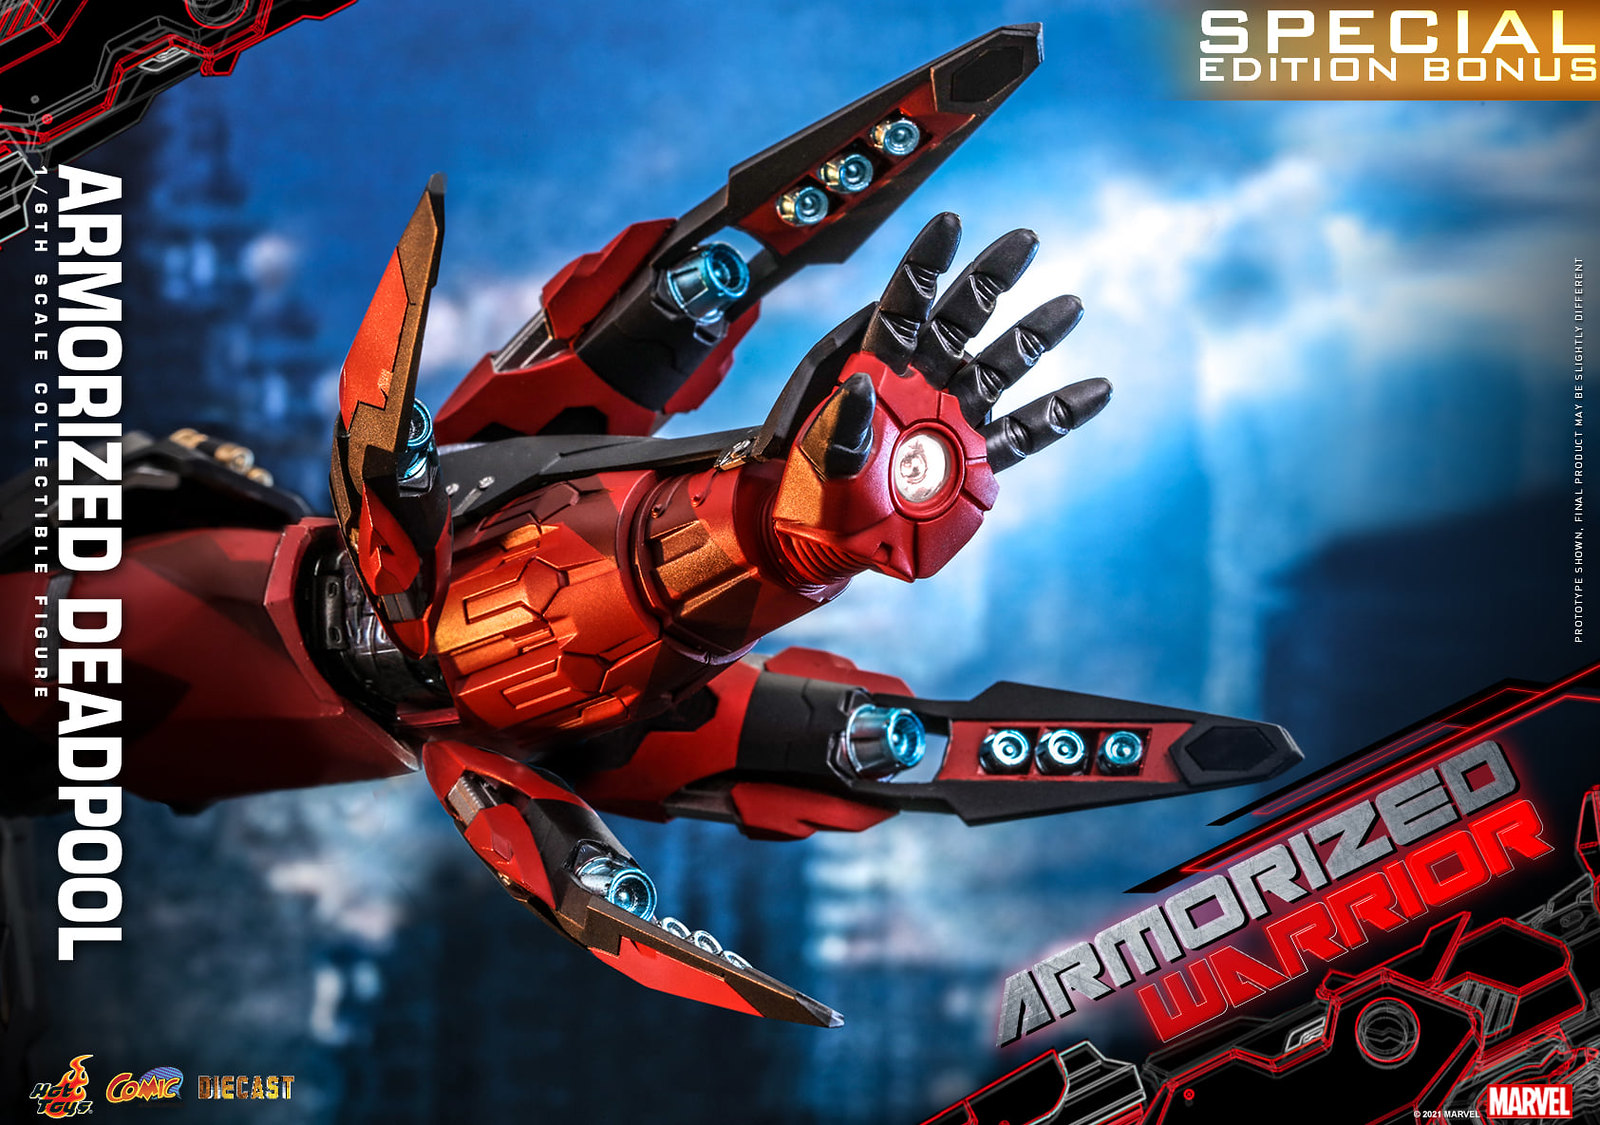 NEW PRODUCT: Hot Toys Armorized Warrior - 1/6th scale Armorized Deadpool Collectible Figure [Armorized Warrior Collection] 51310495872_a4b307407a_h